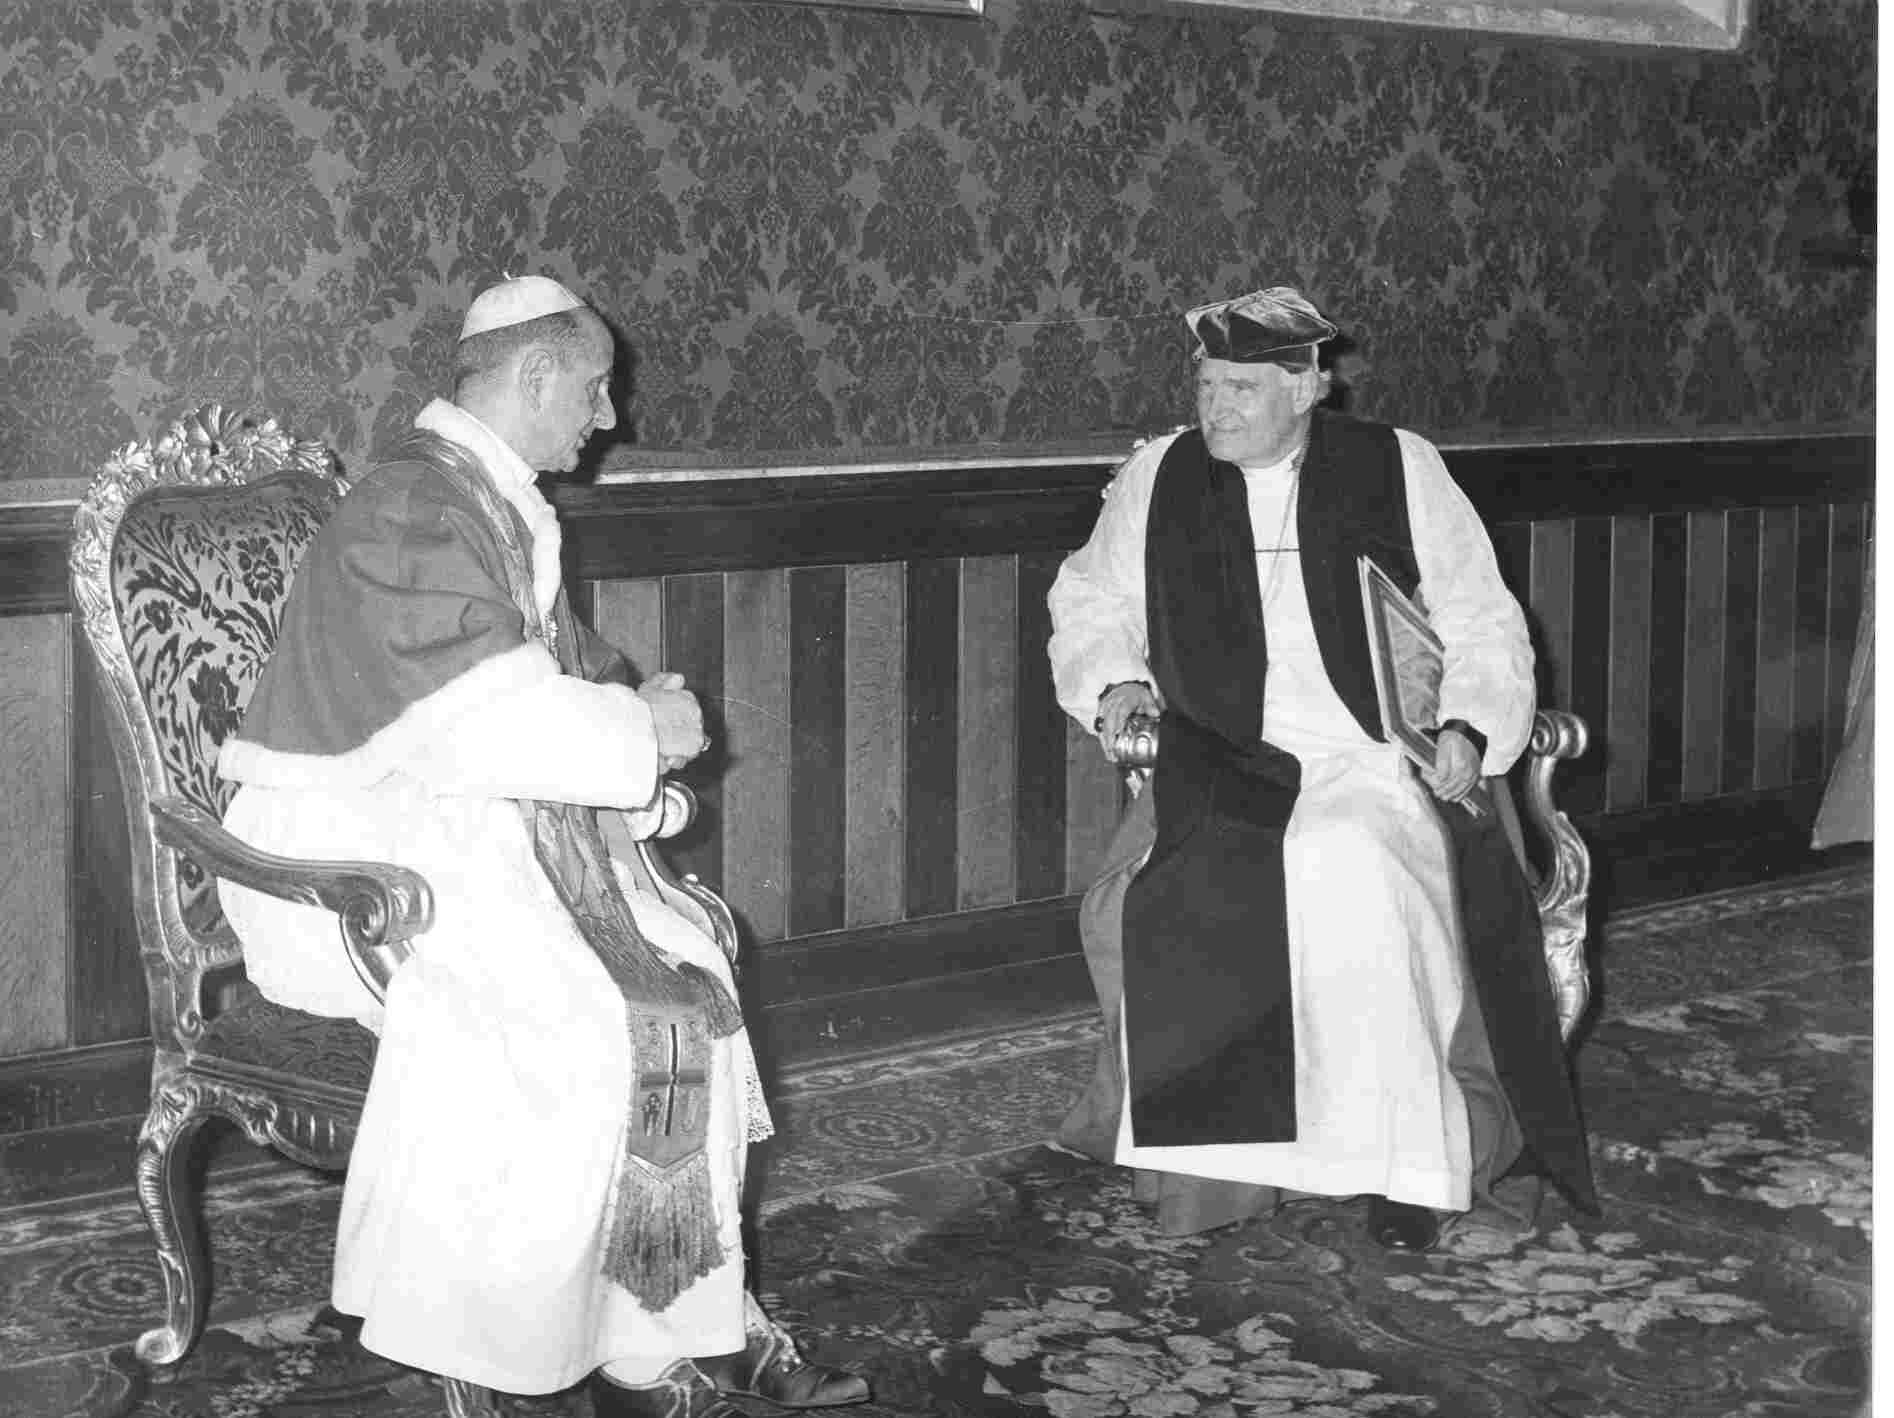 Pope Paul VI and Archbishop of Canterbury Michael Ramsey seated